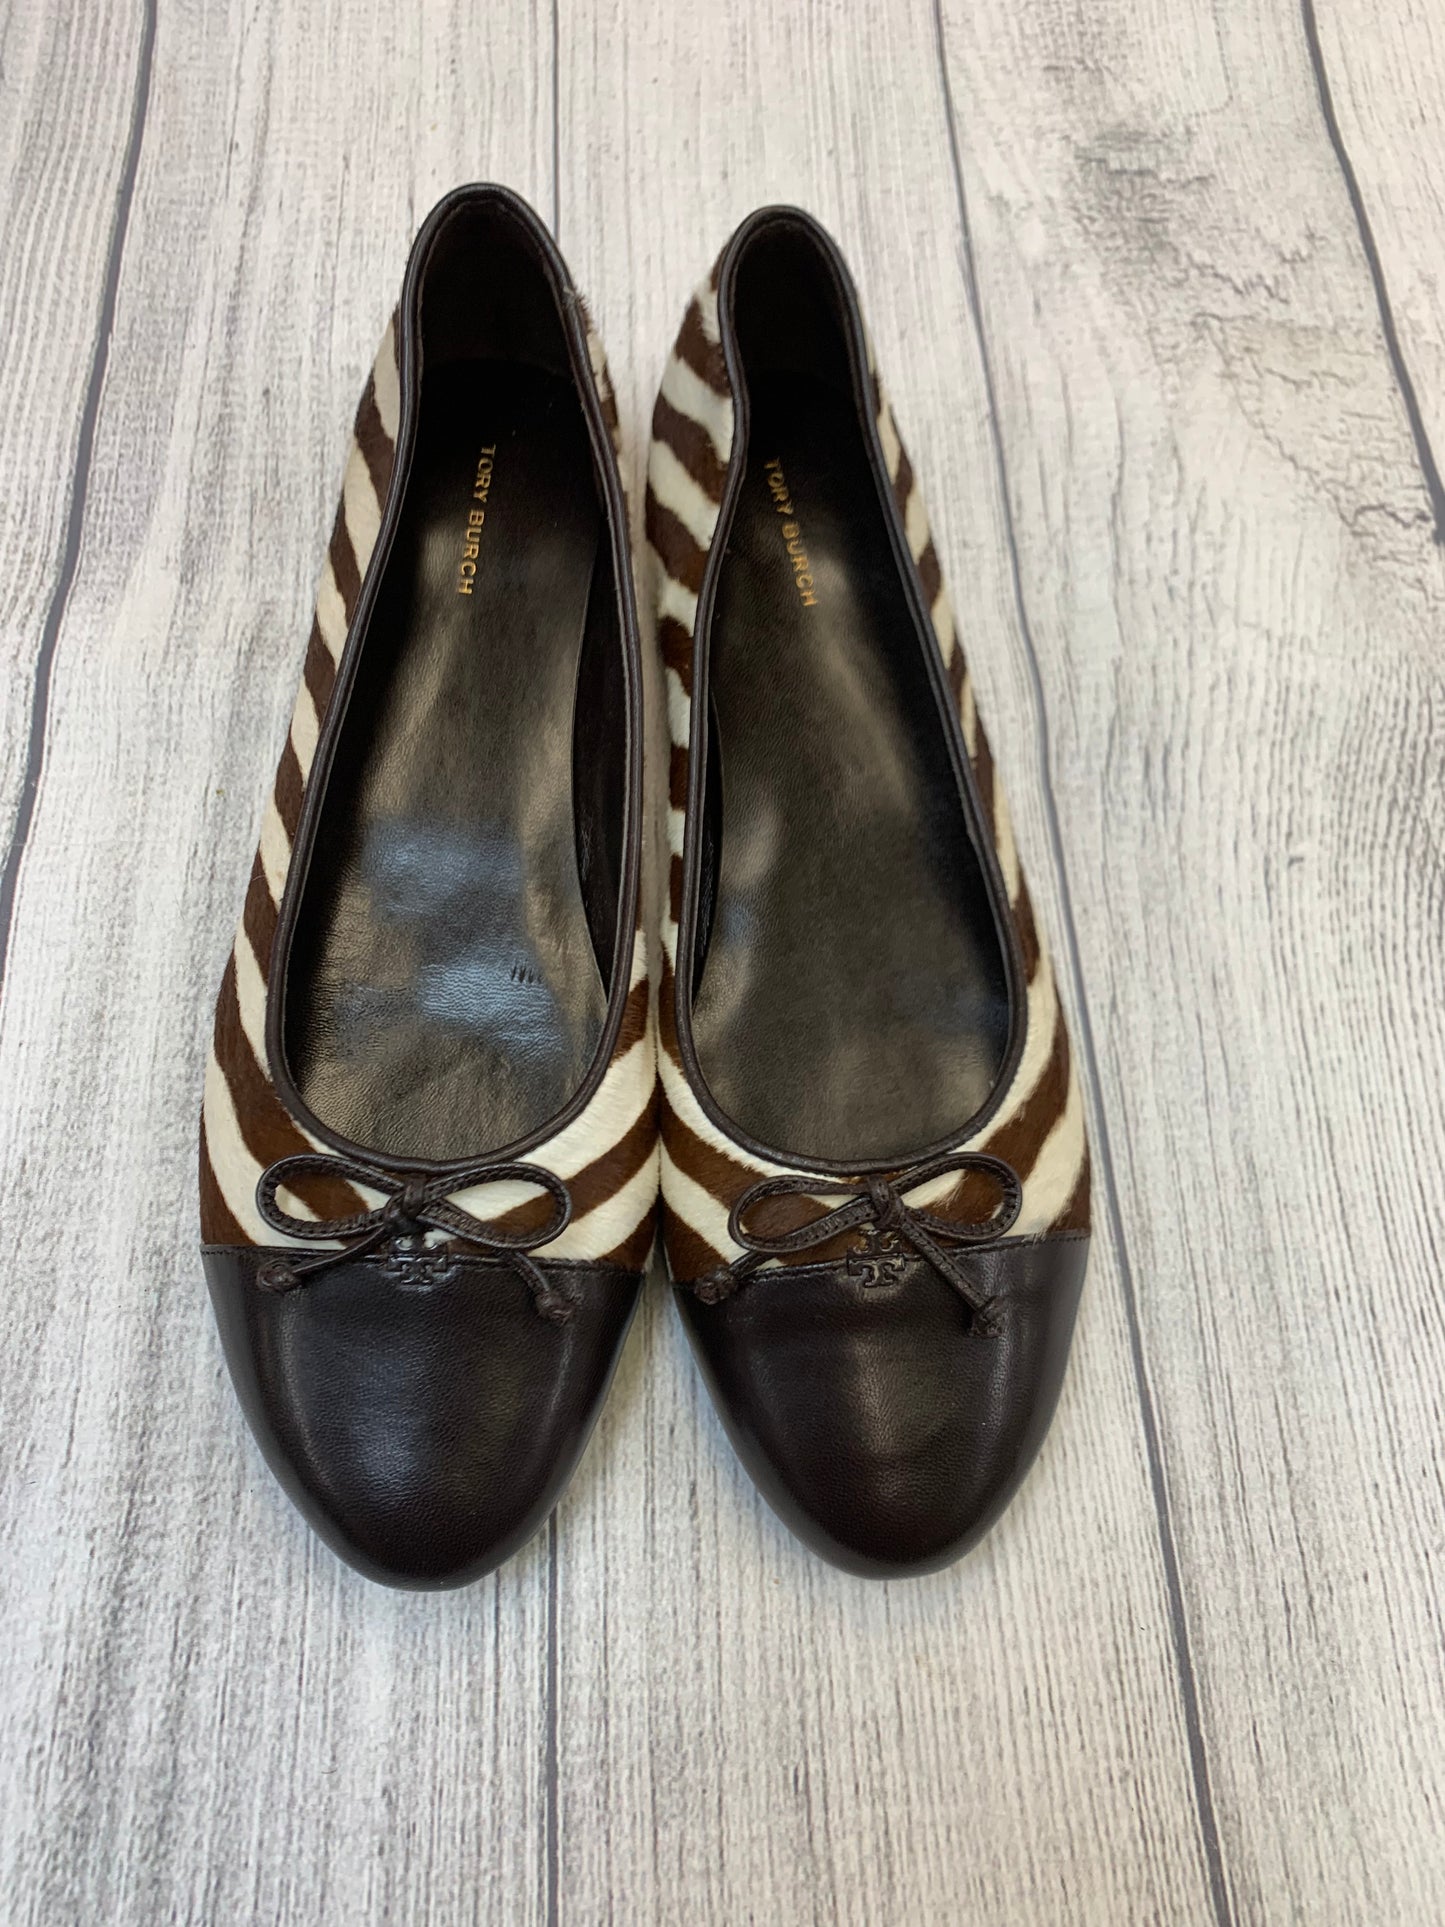 Shoes Flats Ballet By Tory Burch  Size: 10.5